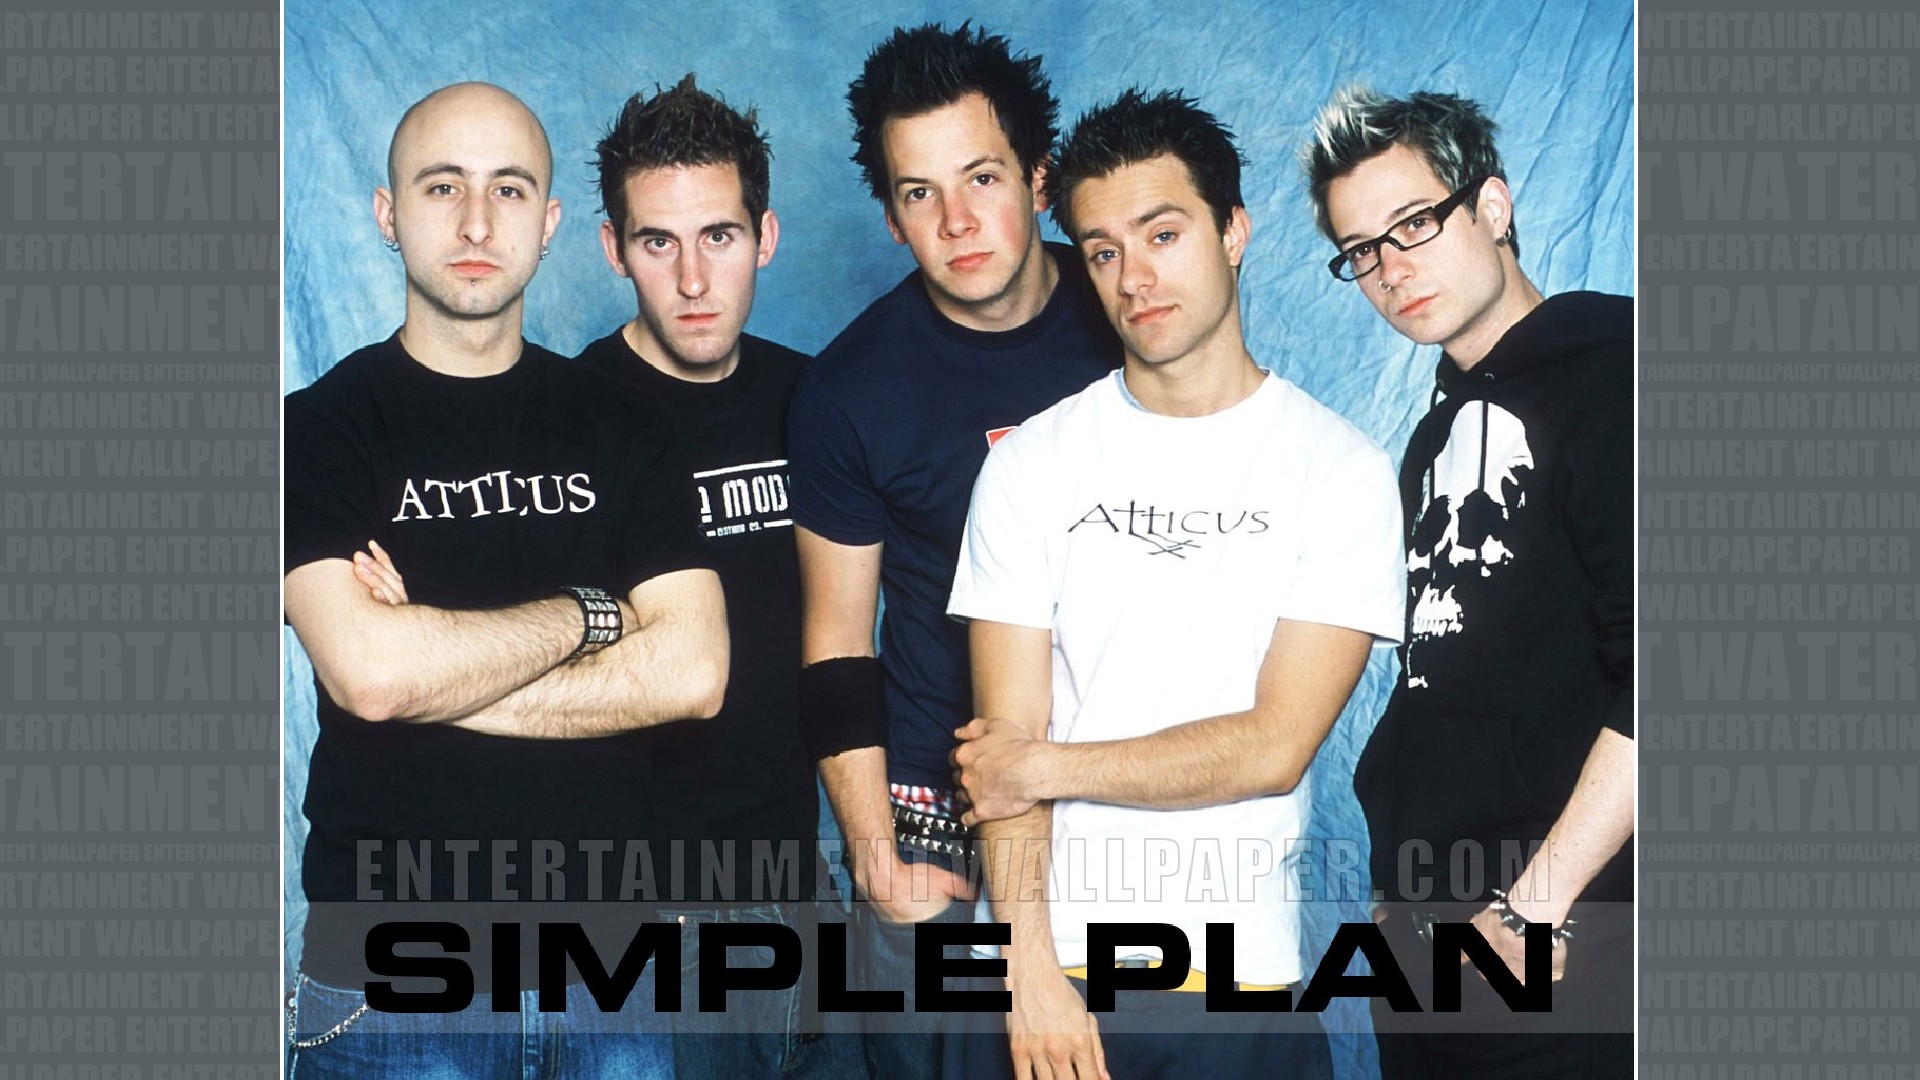 Simple Plan Young - 1920x1080 Wallpaper 